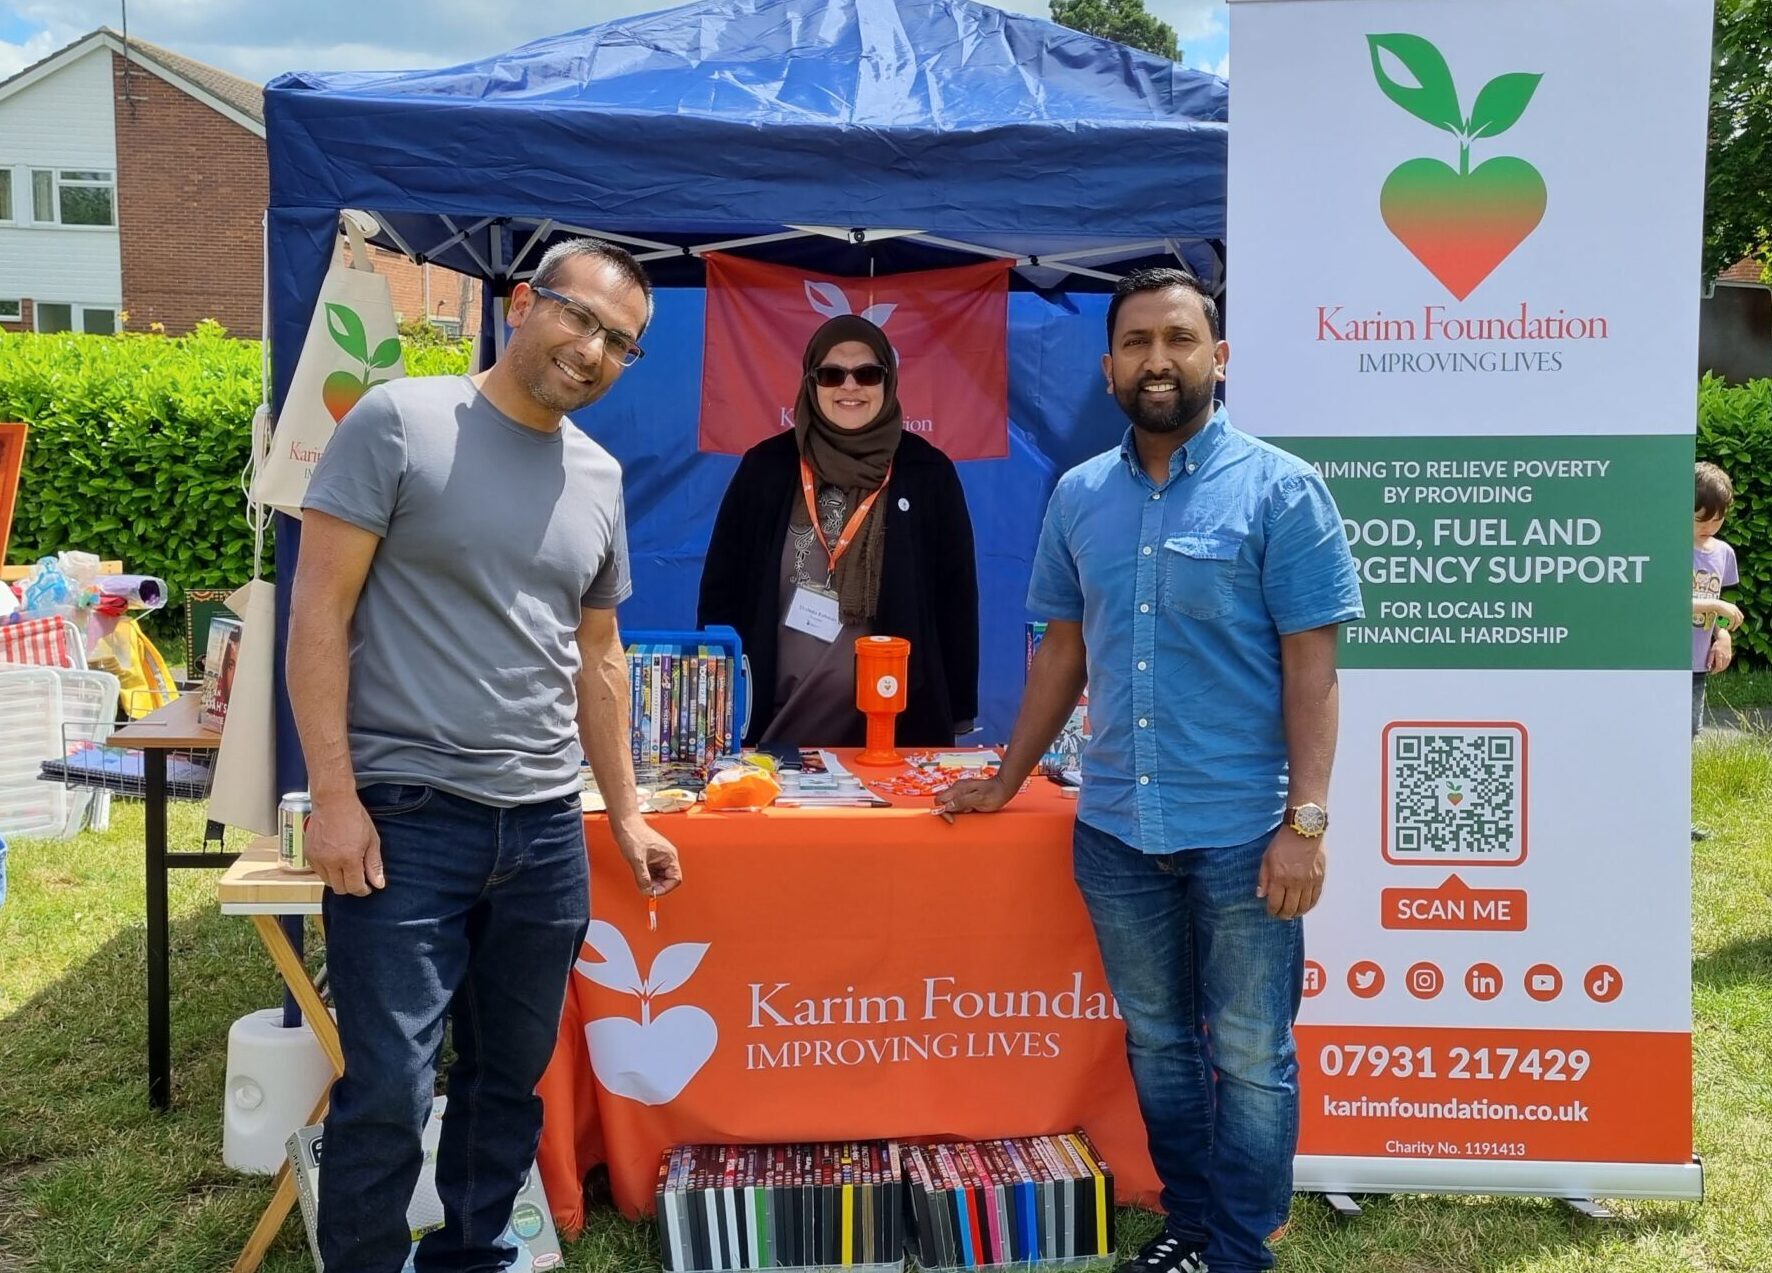 Two visitors standing in front of the Karim Foundation stall at the Arbury Carnival in 2022.